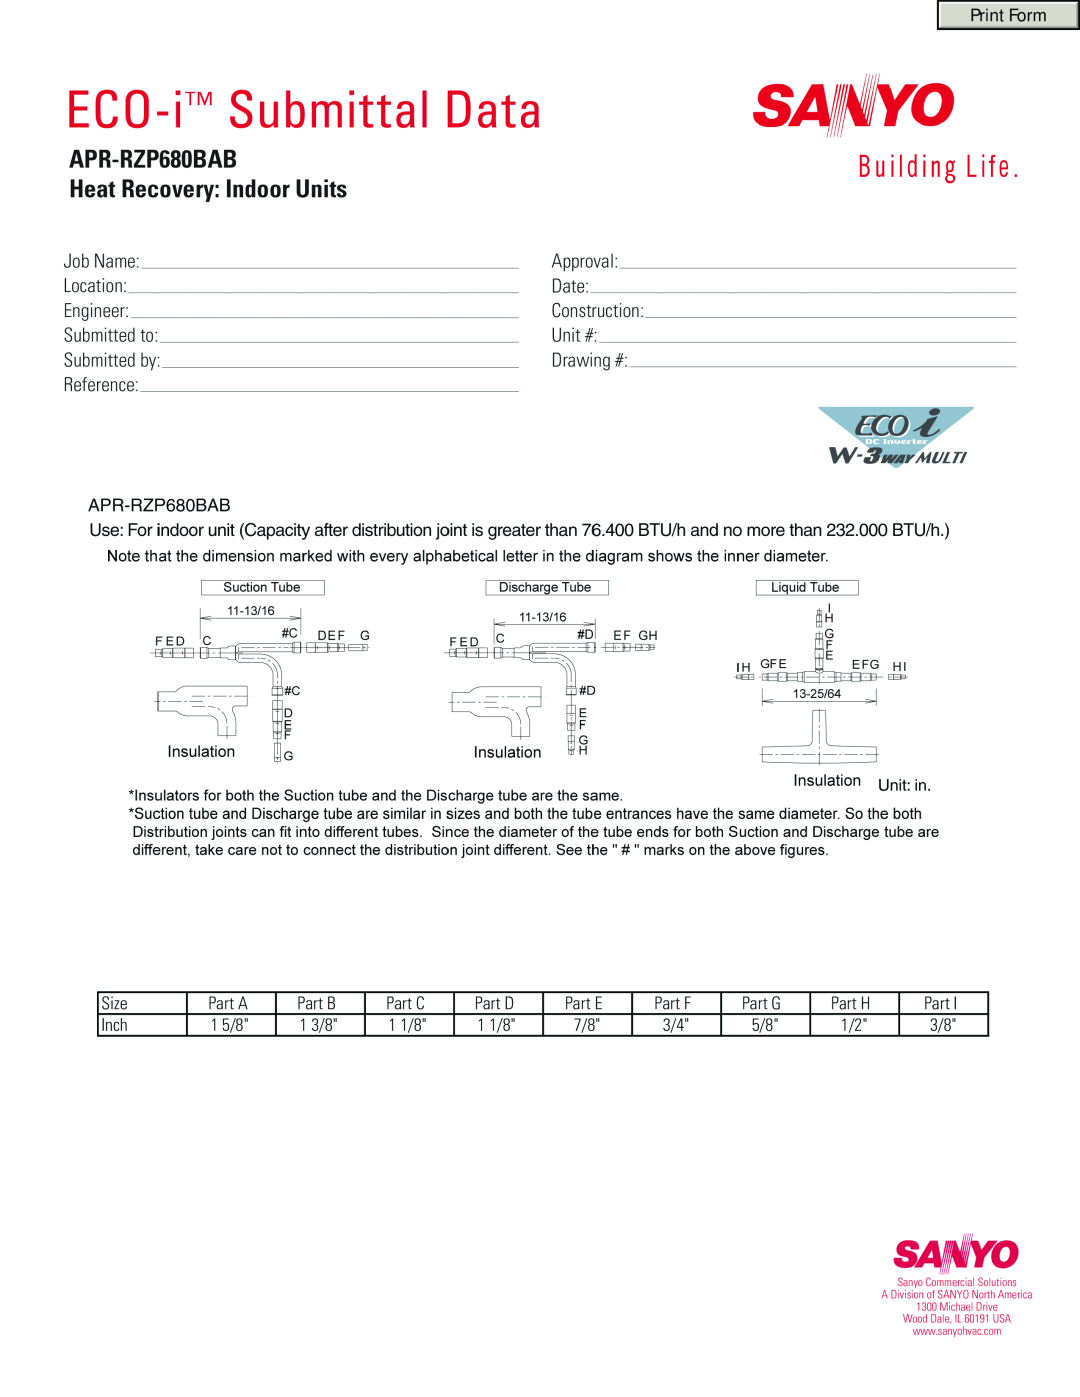 Sanyo manual ECO-i Submittal Data, APR-RZP680BAB Heat Recovery Indoor Units 